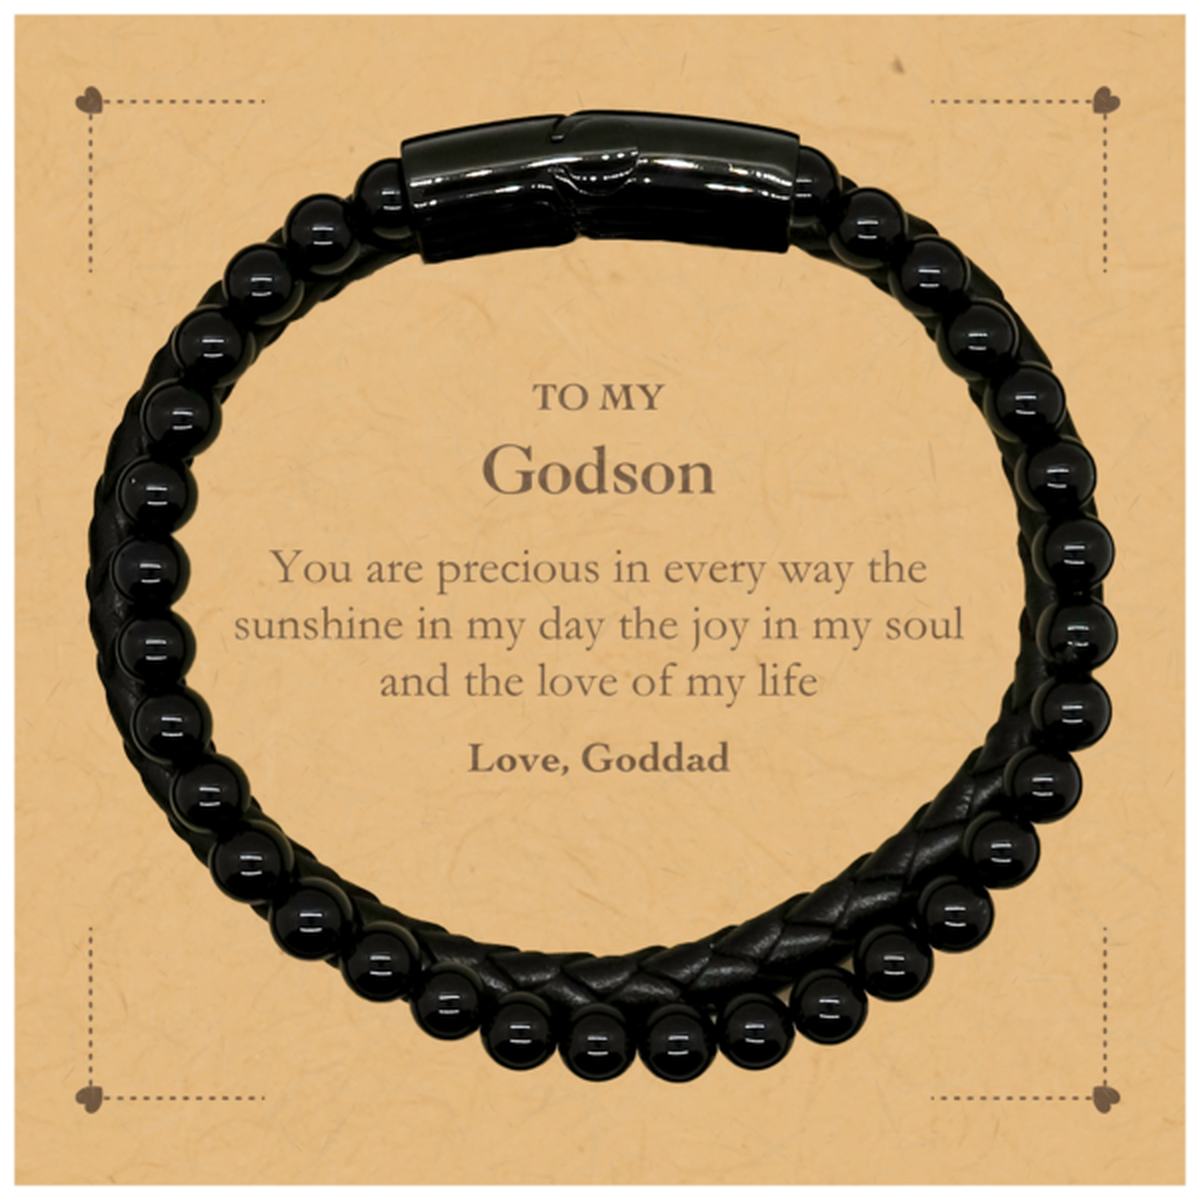 Graduation Gifts for Godson Stone Leather Bracelets Present from Goddad, Christmas Godson Birthday Gifts Godson You are precious in every way the sunshine in my day. Love, Goddad